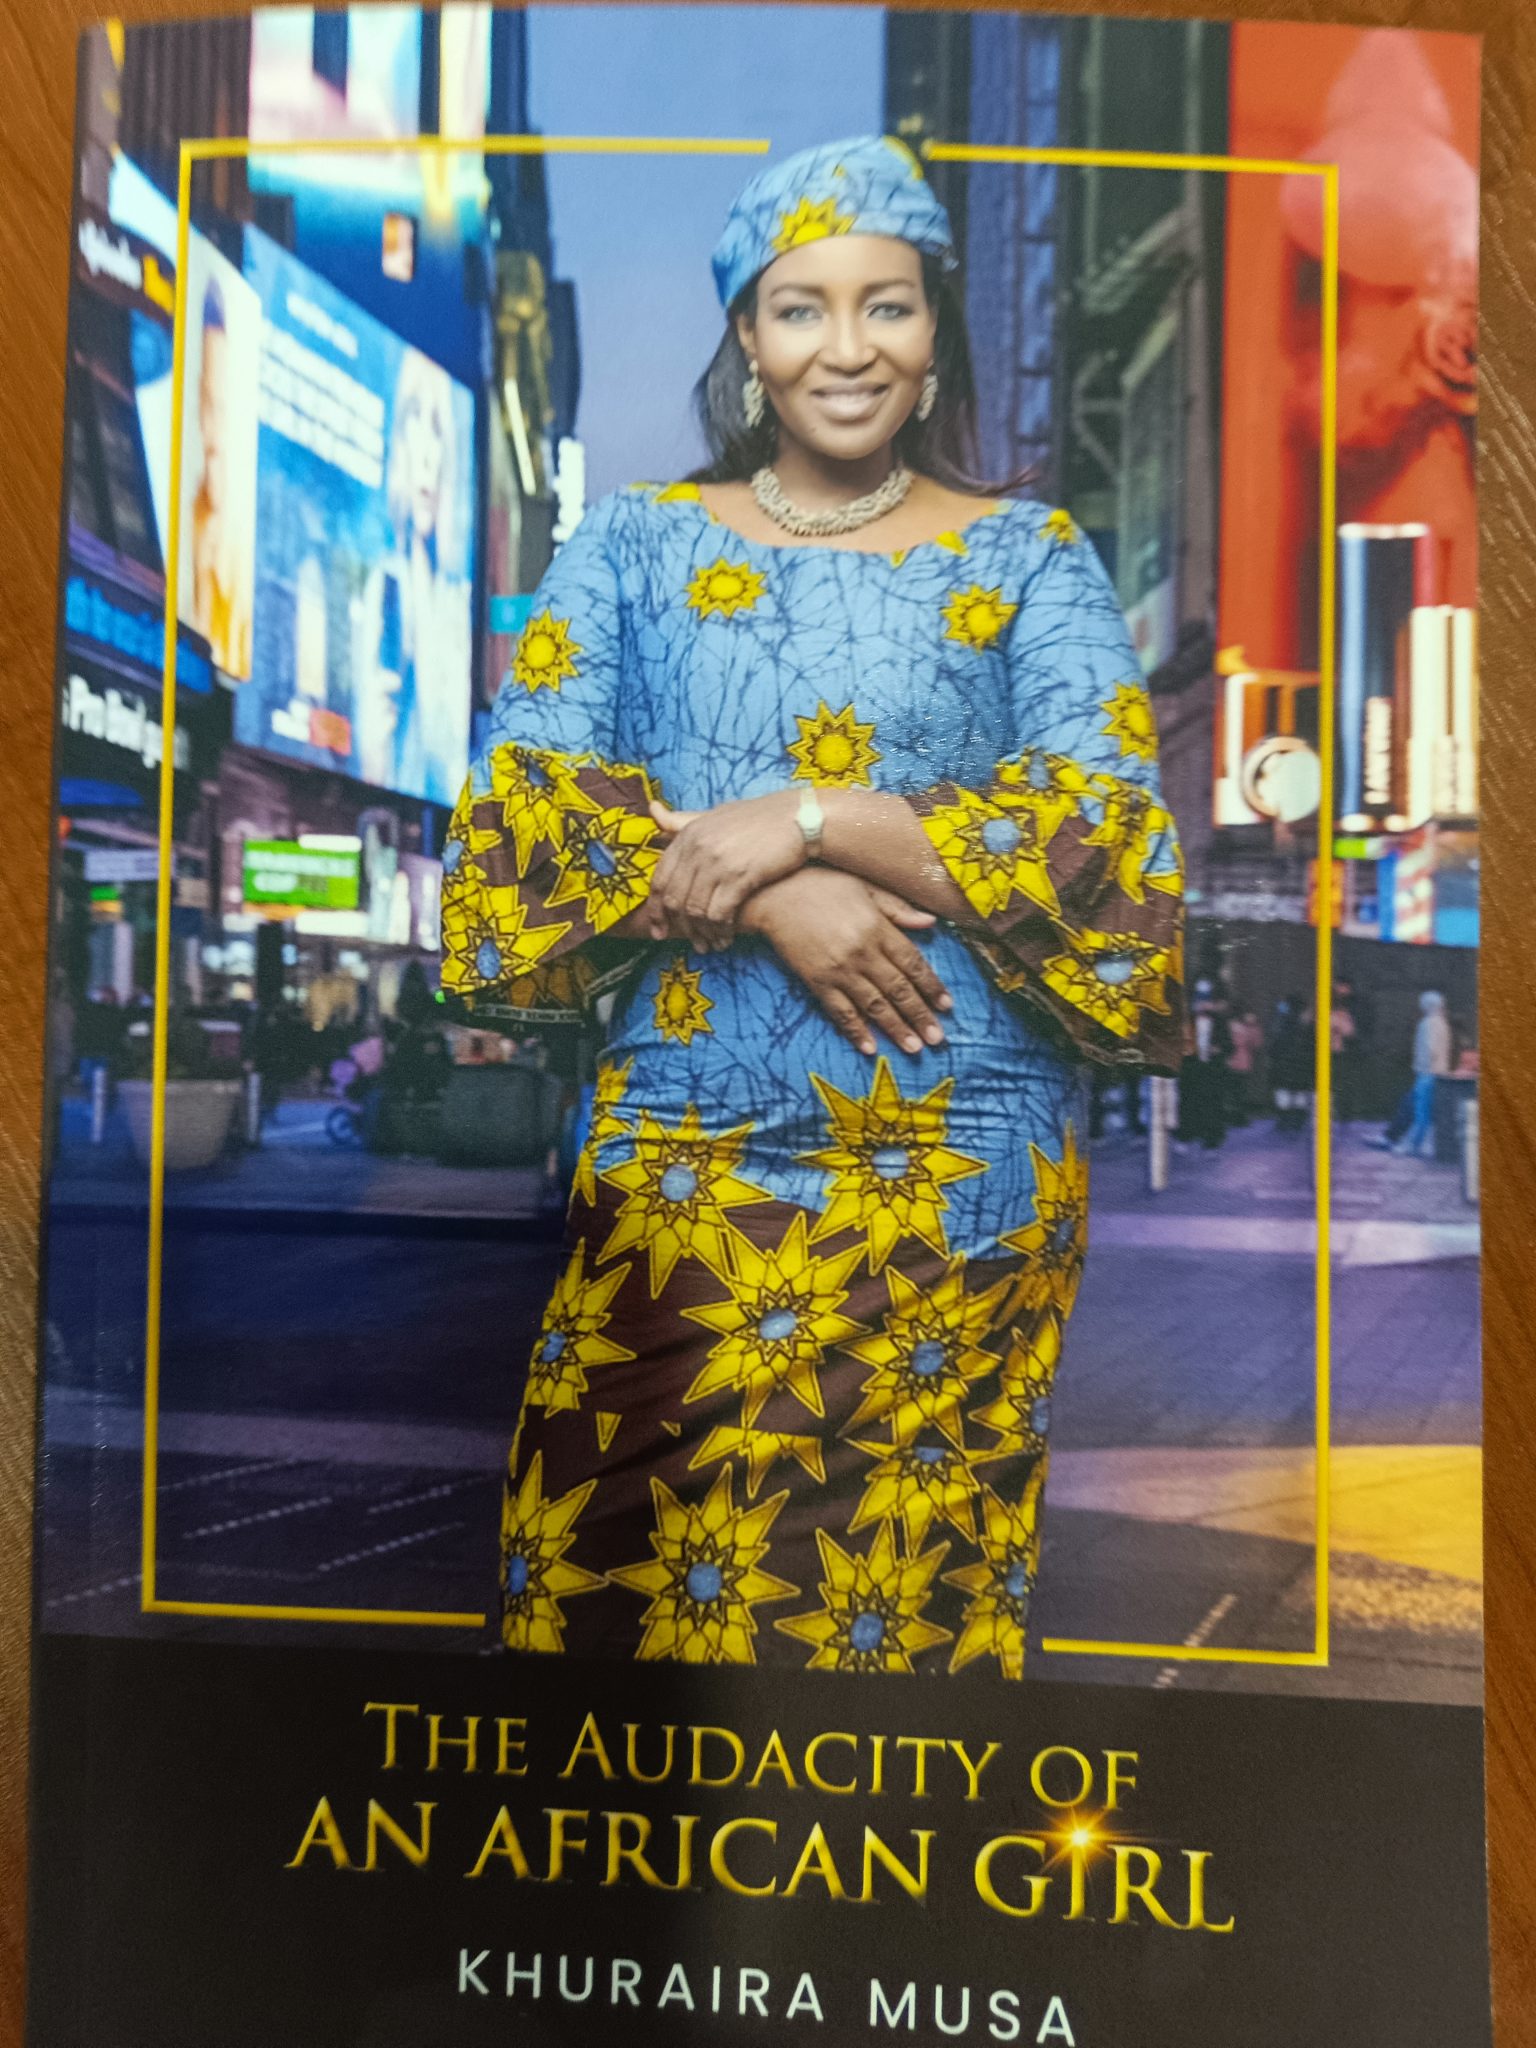 Book on ‘Audacity of African Girl’ receiving rave reviews online